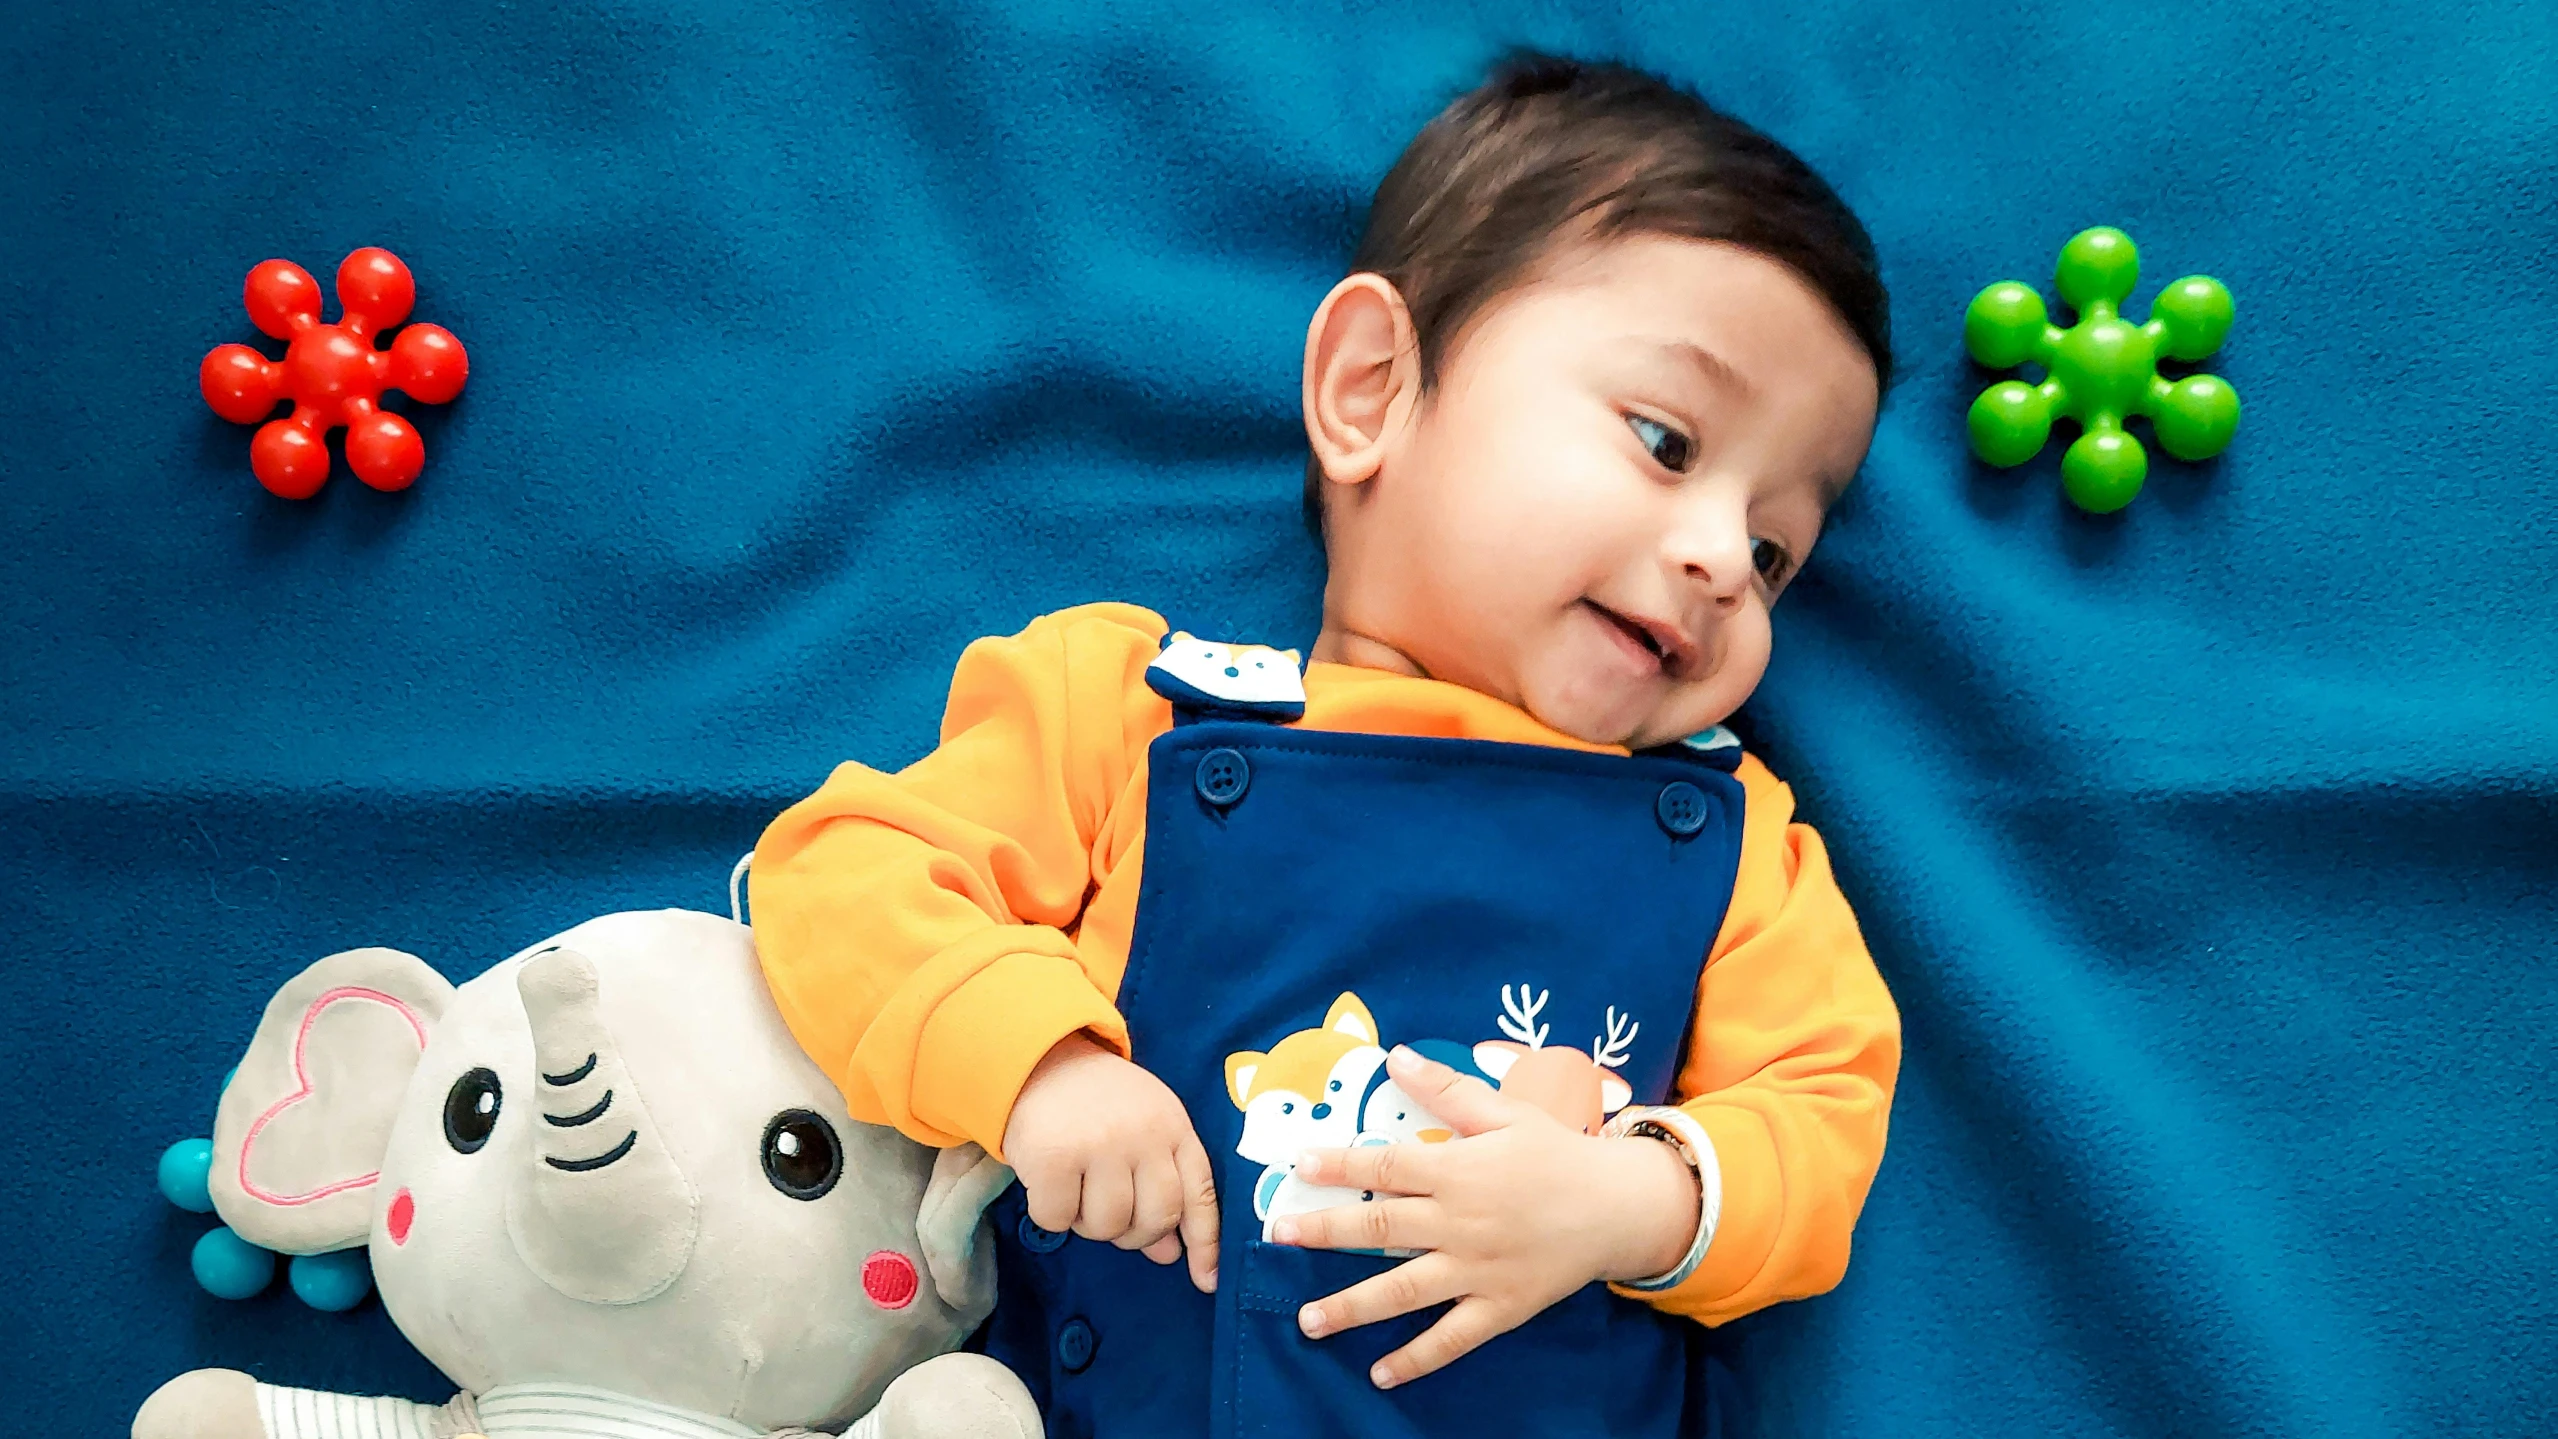 a baby posing for the camera while holding a stuffed animal